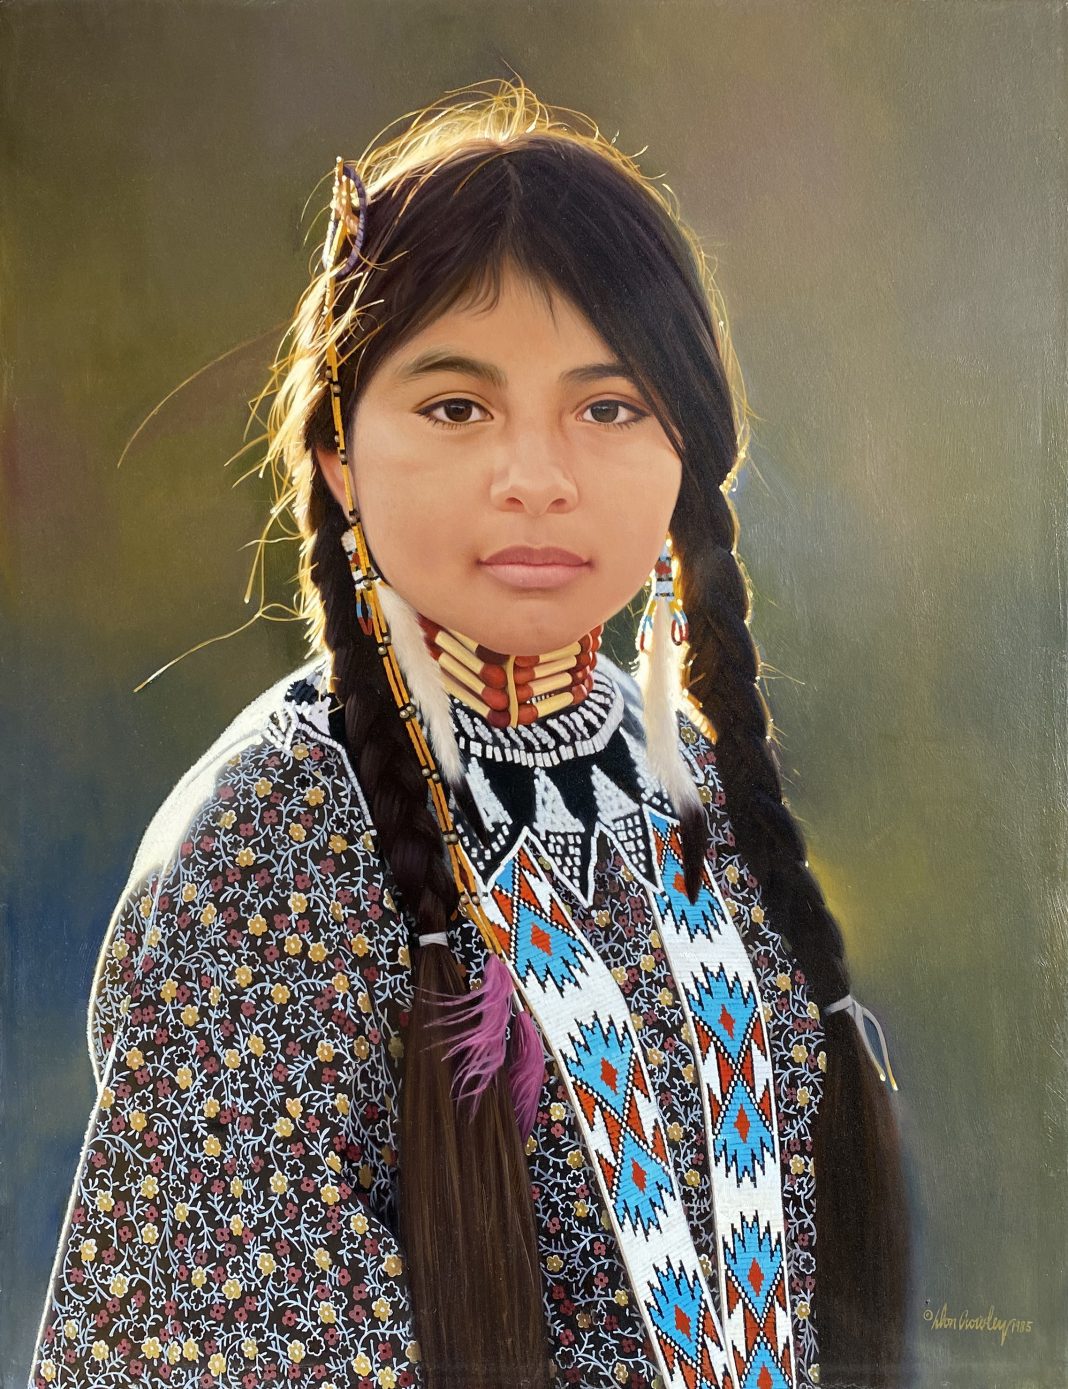 Donald Crowley Evening Light Native American girl woman Indian Paiute flowered flower dress western oil painting